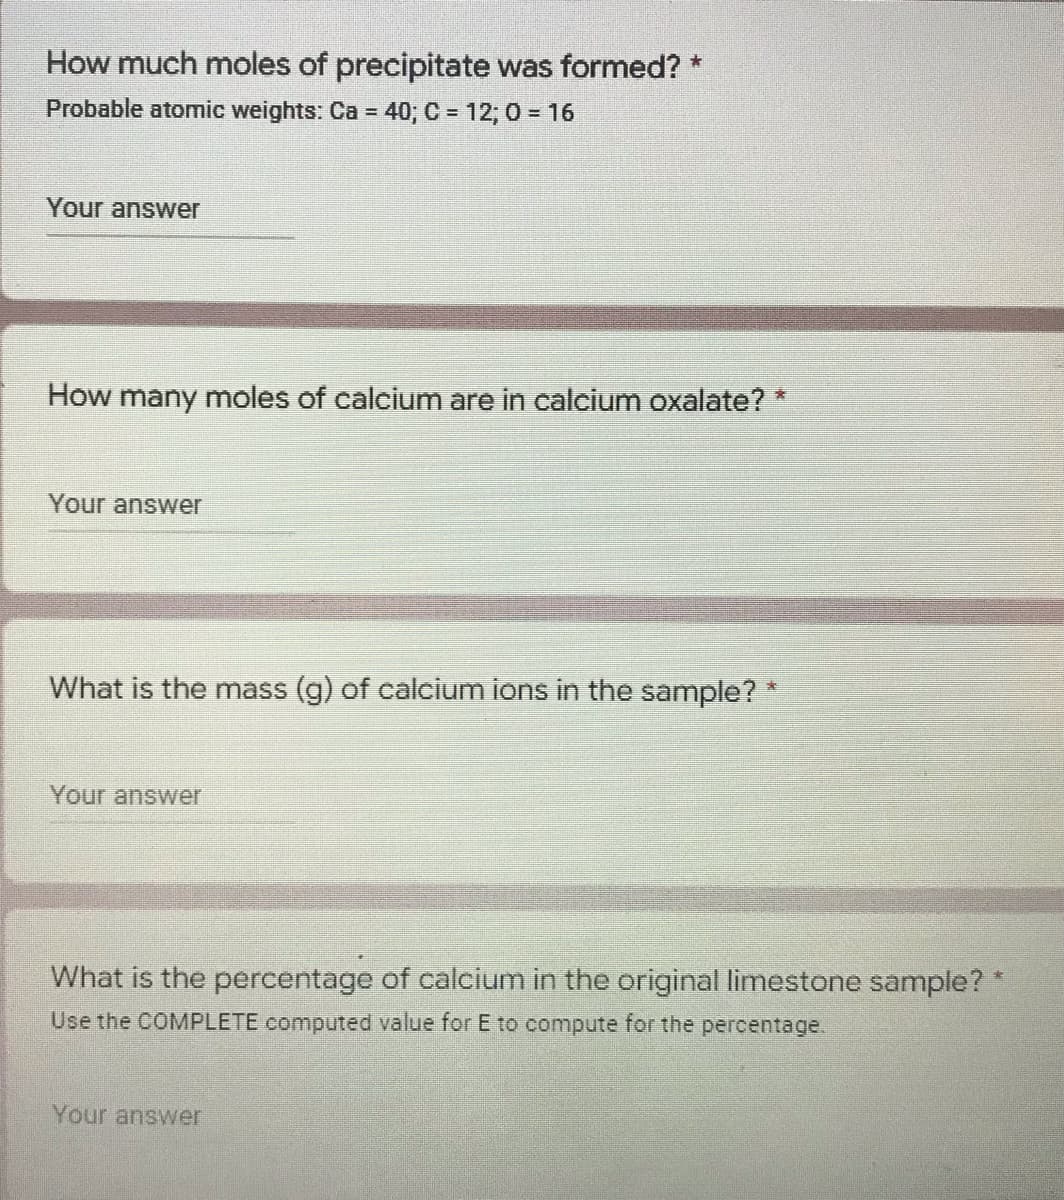 How much moles of precipitate was formed? *
Probable atomic weights: Ca = 40; C = 12; 0 = 16
Your answer
How many moles of calcium are in calcium oxalate? *
Your answer
What is the mass (g) of calcium ions in the sample? *
Your answer
What is the percentage of calcium in the original limestone sample? *
Use the COMPLETE computed value for E to compute for the percentage.
Your answer